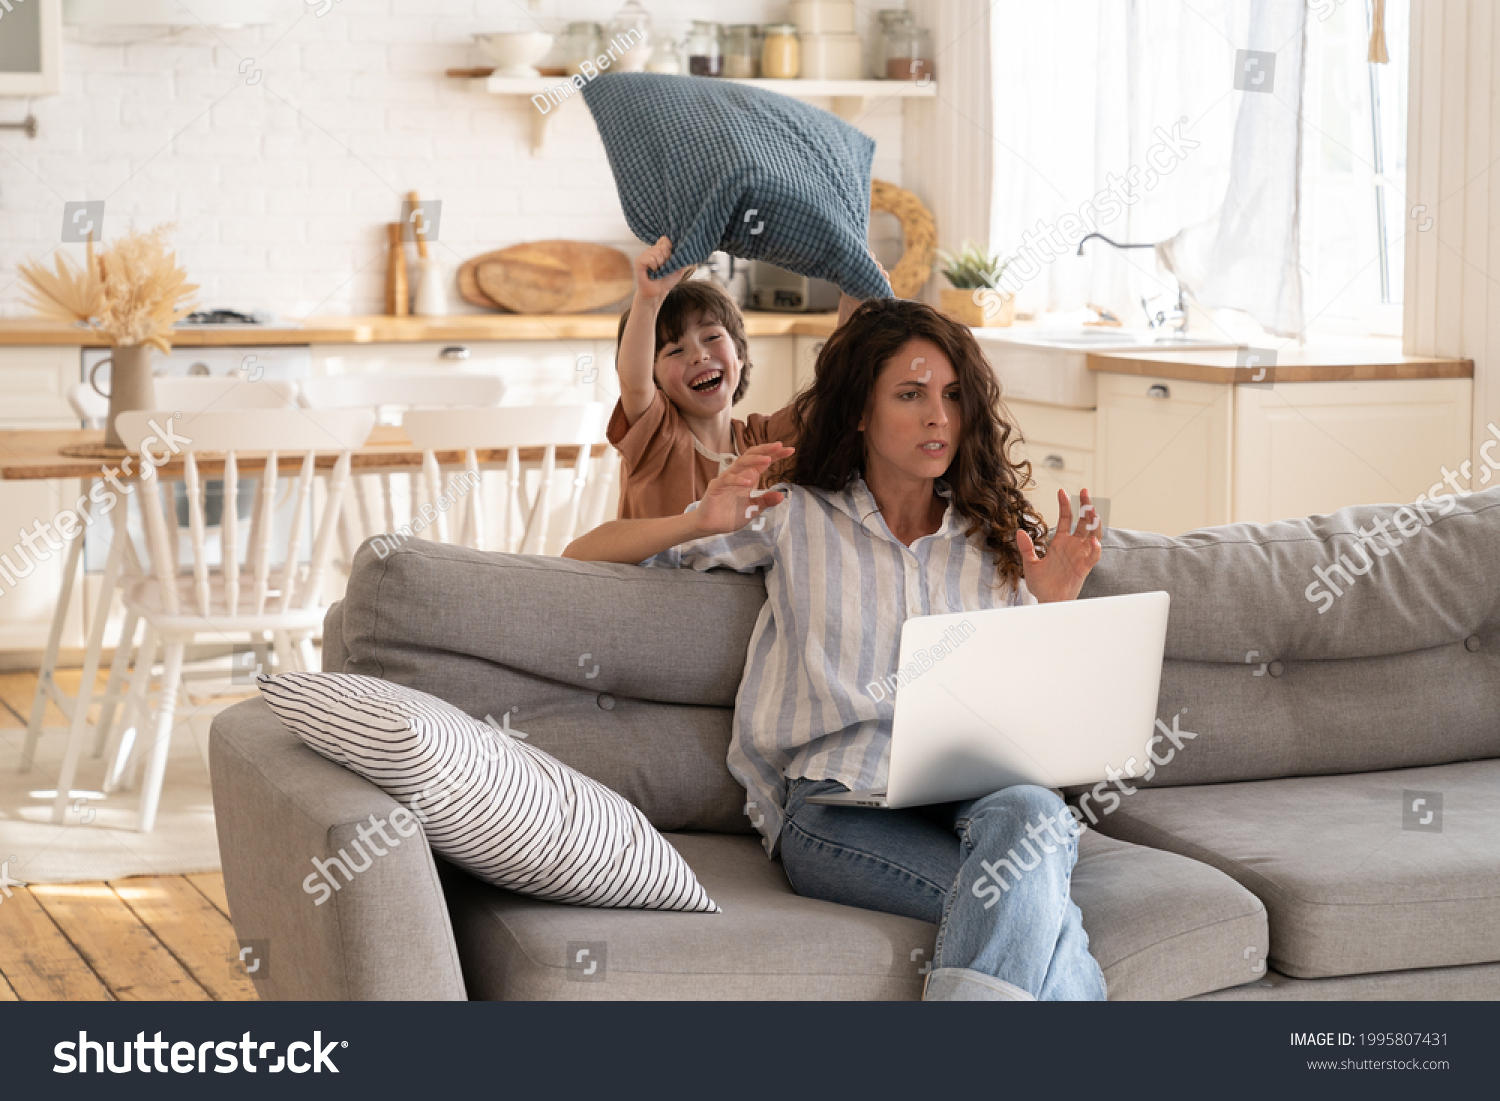 Furious young woman try to concentrate on work as small disobedient kid hit her with pillow. Angry mother freelancer or distance office worker on lockdown at home with hyperactive preschooler child #1995807431